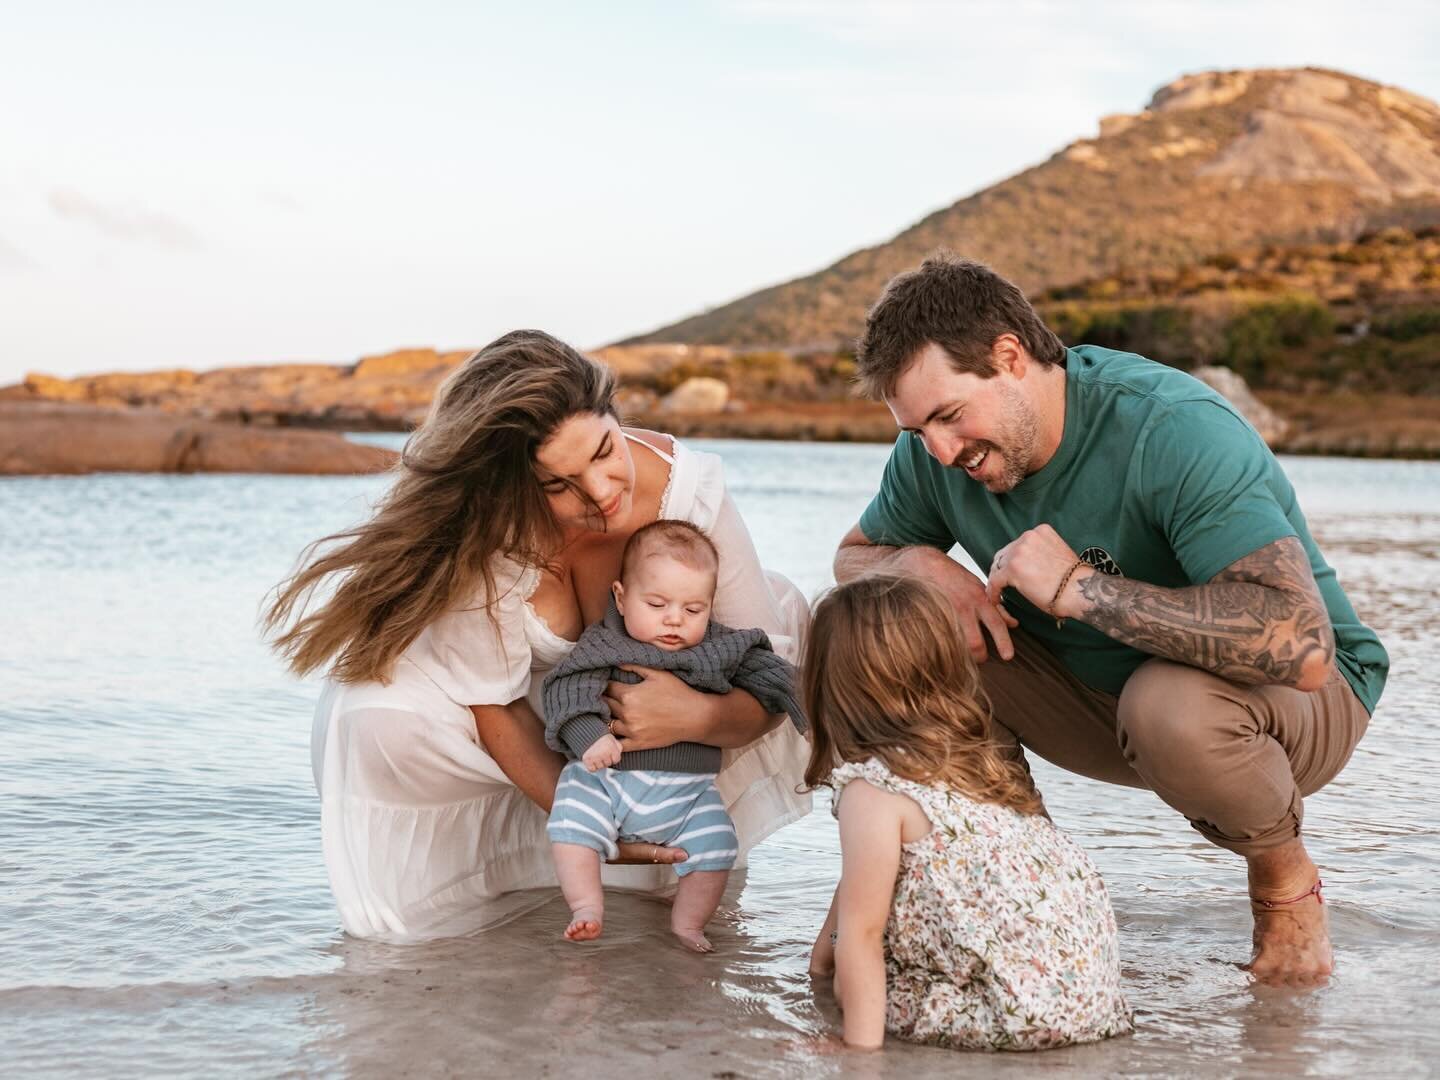 🌊 Capture unforgettable memories with your loved ones at the beach with a fun professional family photo sessions! 📸 Let me help you create stunning and timeless images that you&rsquo;ll cherish forever. 🌅 Book your beach photoshoot today and treas